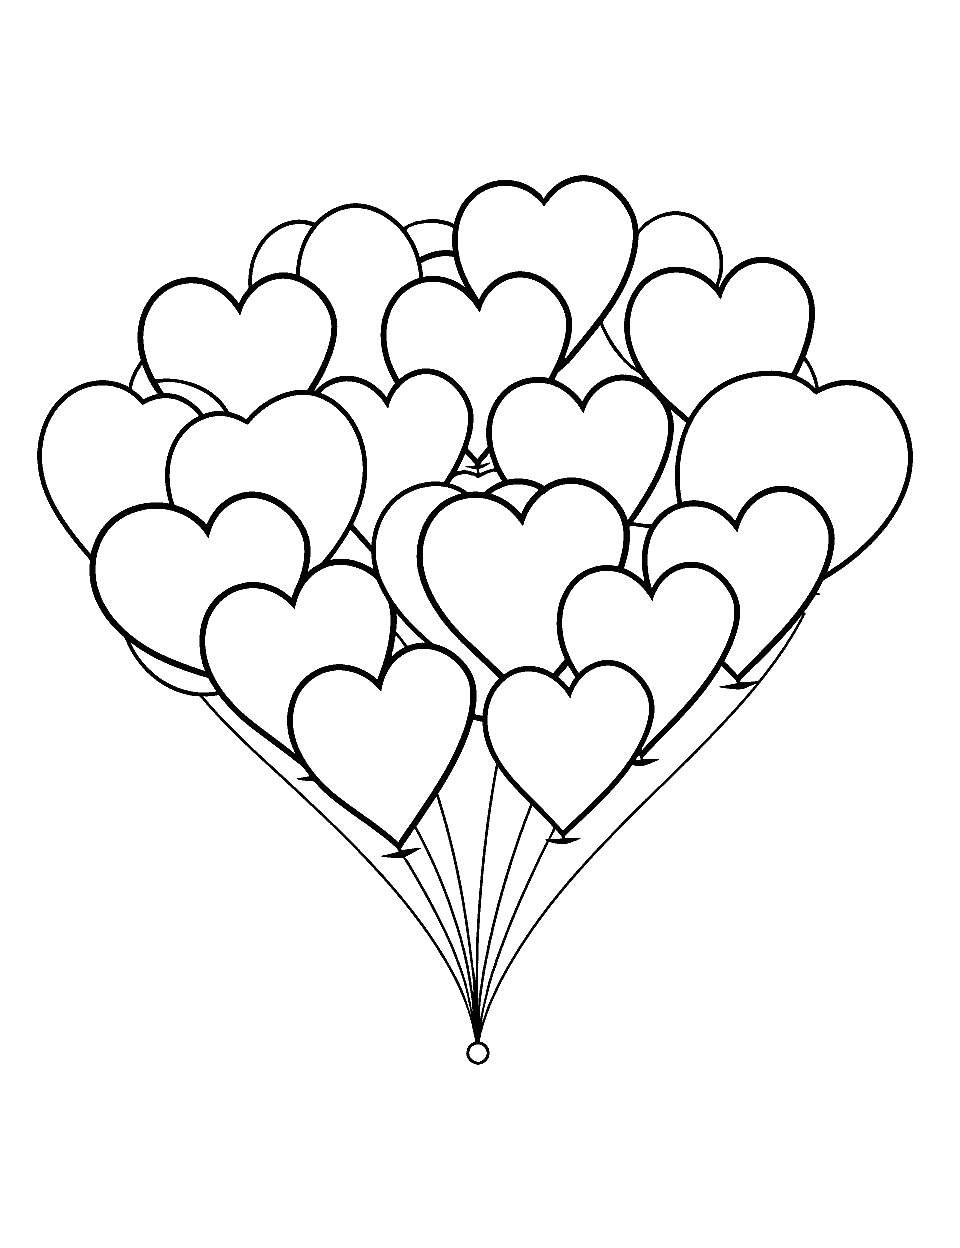 Balloons Heart Coloring Page - A bunch of heart-shaped balloons flying high in the sky.